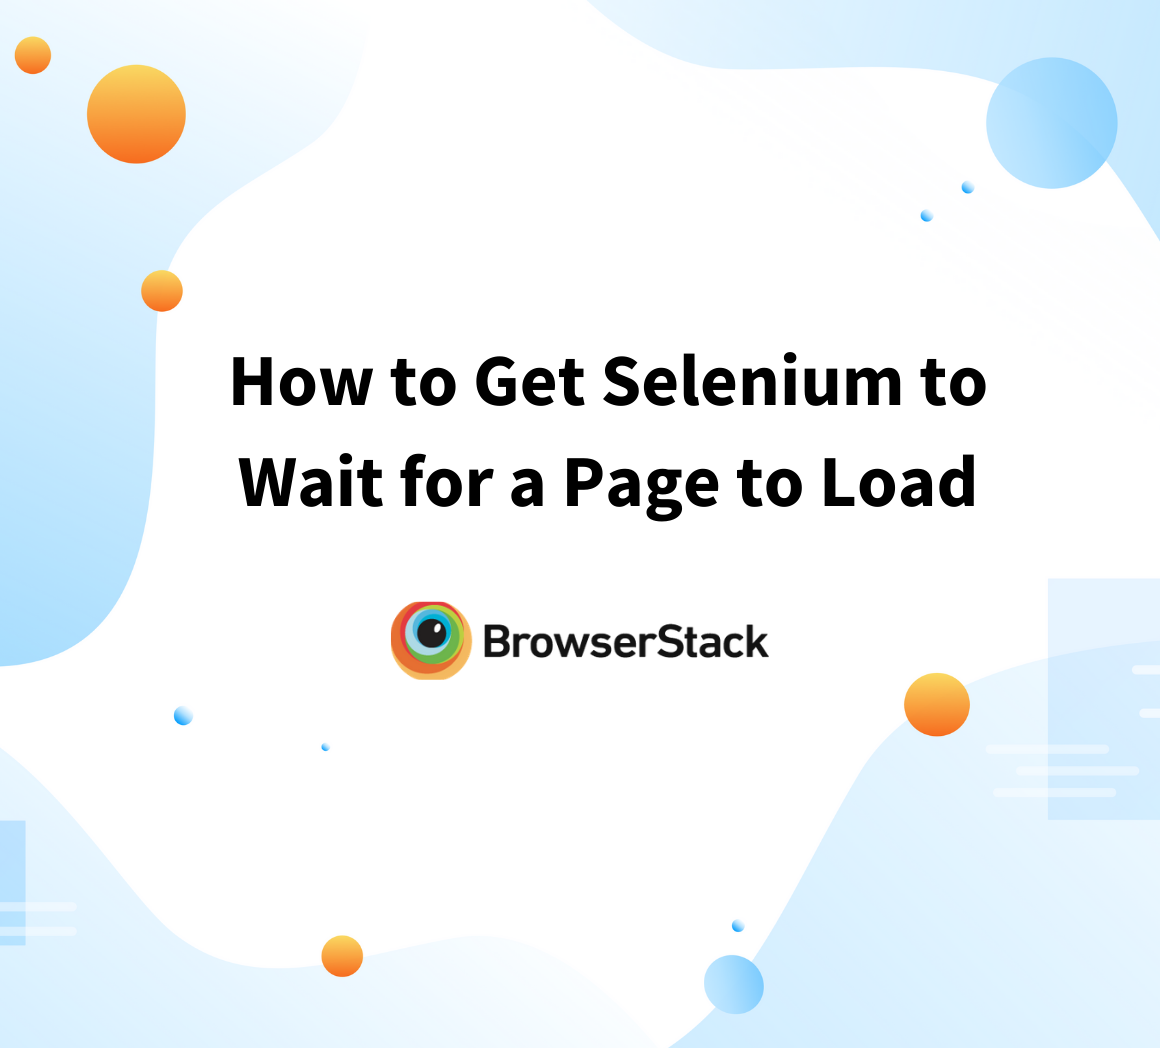 How to get Selenium to wait for a page to load